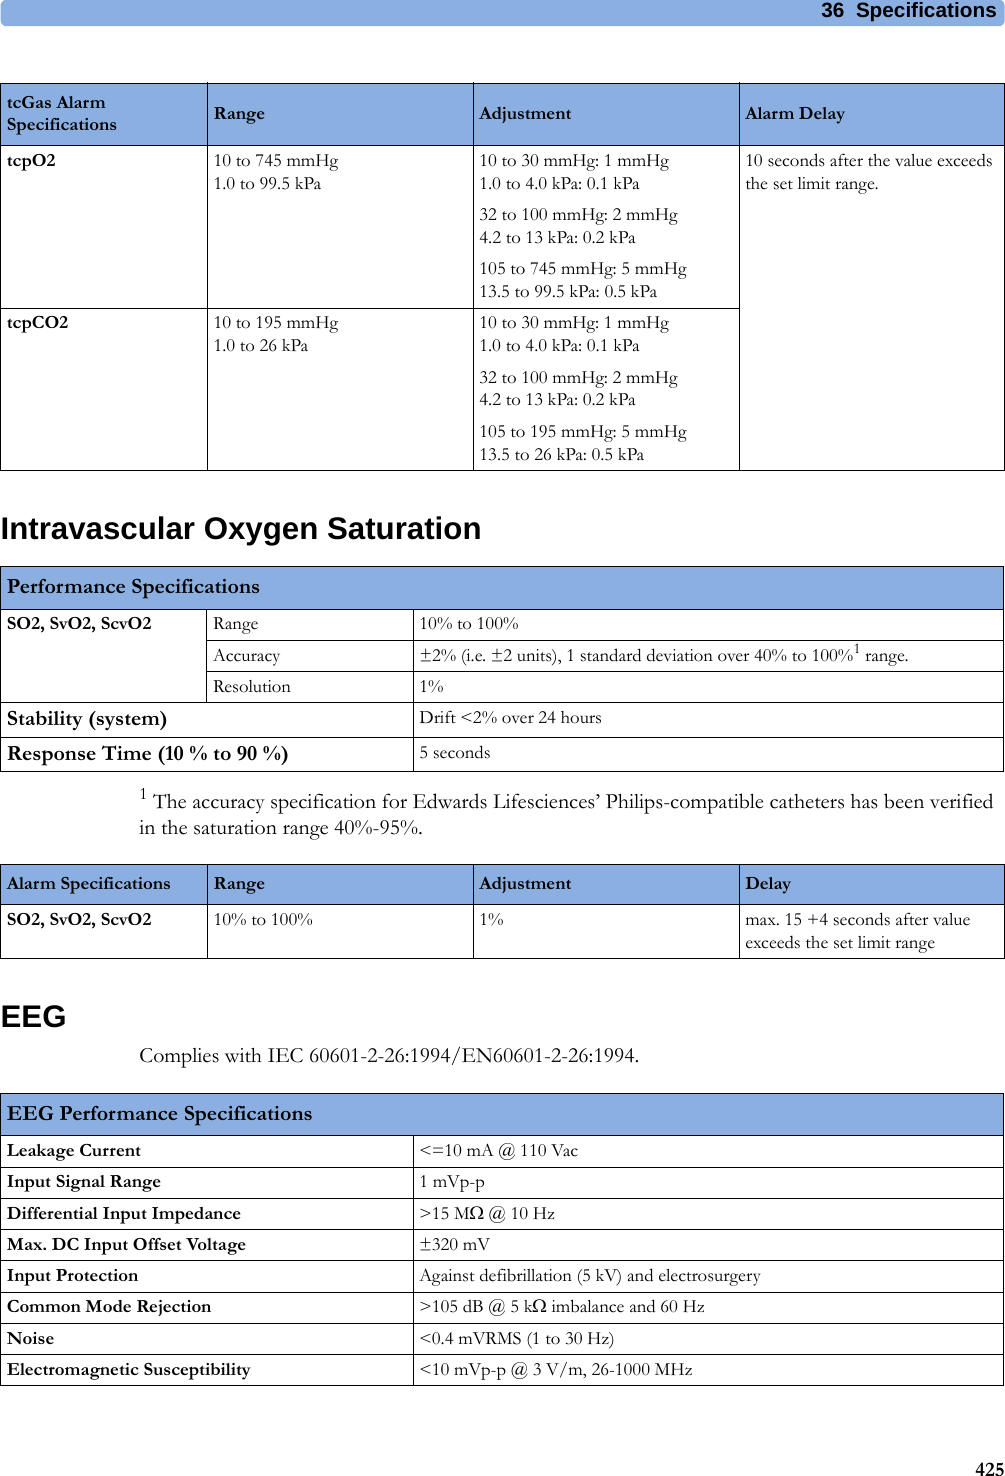 36 Specifications425Intravascular Oxygen Saturation1 The accuracy specification for Edwards Lifesciences’ Philips-compatible catheters has been verified in the saturation range 40%-95%.EEGComplies with IEC 60601-2-26:1994/EN60601-2-26:1994.tcGas Alarm Specifications Range Adjustment Alarm DelaytcpO2 10 to 745 mmHg1.0 to 99.5 kPa10 to 30 mmHg: 1 mmHg1.0 to 4.0 kPa: 0.1 kPa32 to 100 mmHg: 2 mmHg4.2 to 13 kPa: 0.2 kPa105 to 745 mmHg: 5 mmHg13.5 to 99.5 kPa: 0.5 kPa10 seconds after the value exceeds the set limit range.tcpCO2 10 to 195 mmHg1.0 to 26 kPa10 to 30 mmHg: 1 mmHg1.0 to 4.0 kPa: 0.1 kPa32 to 100 mmHg: 2 mmHg4.2 to 13 kPa: 0.2 kPa105 to 195 mmHg: 5 mmHg13.5 to 26 kPa: 0.5 kPaPerformance SpecificationsSO2, SvO2, ScvO2 Range 10% to 100%Accuracy ±2% (i.e. ±2 units), 1 standard deviation over 40% to 100%1 range.Resolution 1%Stability (system) Drift &lt;2% over 24 hoursResponse Time (10 % to 90 %) 5secondsAlarm Specifications Range Adjustment DelaySO2, SvO2, ScvO2 10% to 100% 1% max. 15 +4 seconds after value exceeds the set limit rangeEEG Performance SpecificationsLeakage Current &lt;=10 mA @ 110 VacInput Signal Range 1mVp-pDifferential Input Impedance &gt;15 MΩ @ 10 HzMax. DC Input Offset Voltage ±320 mVInput Protection Against defibrillation (5 kV) and electrosurgeryCommon Mode Rejection &gt;105 dB @ 5 kΩ imbalance and 60 HzNoise &lt;0.4 mVRMS (1 to 30 Hz)Electromagnetic Susceptibility &lt;10 mVp-p @ 3 V/m, 26-1000 MHz